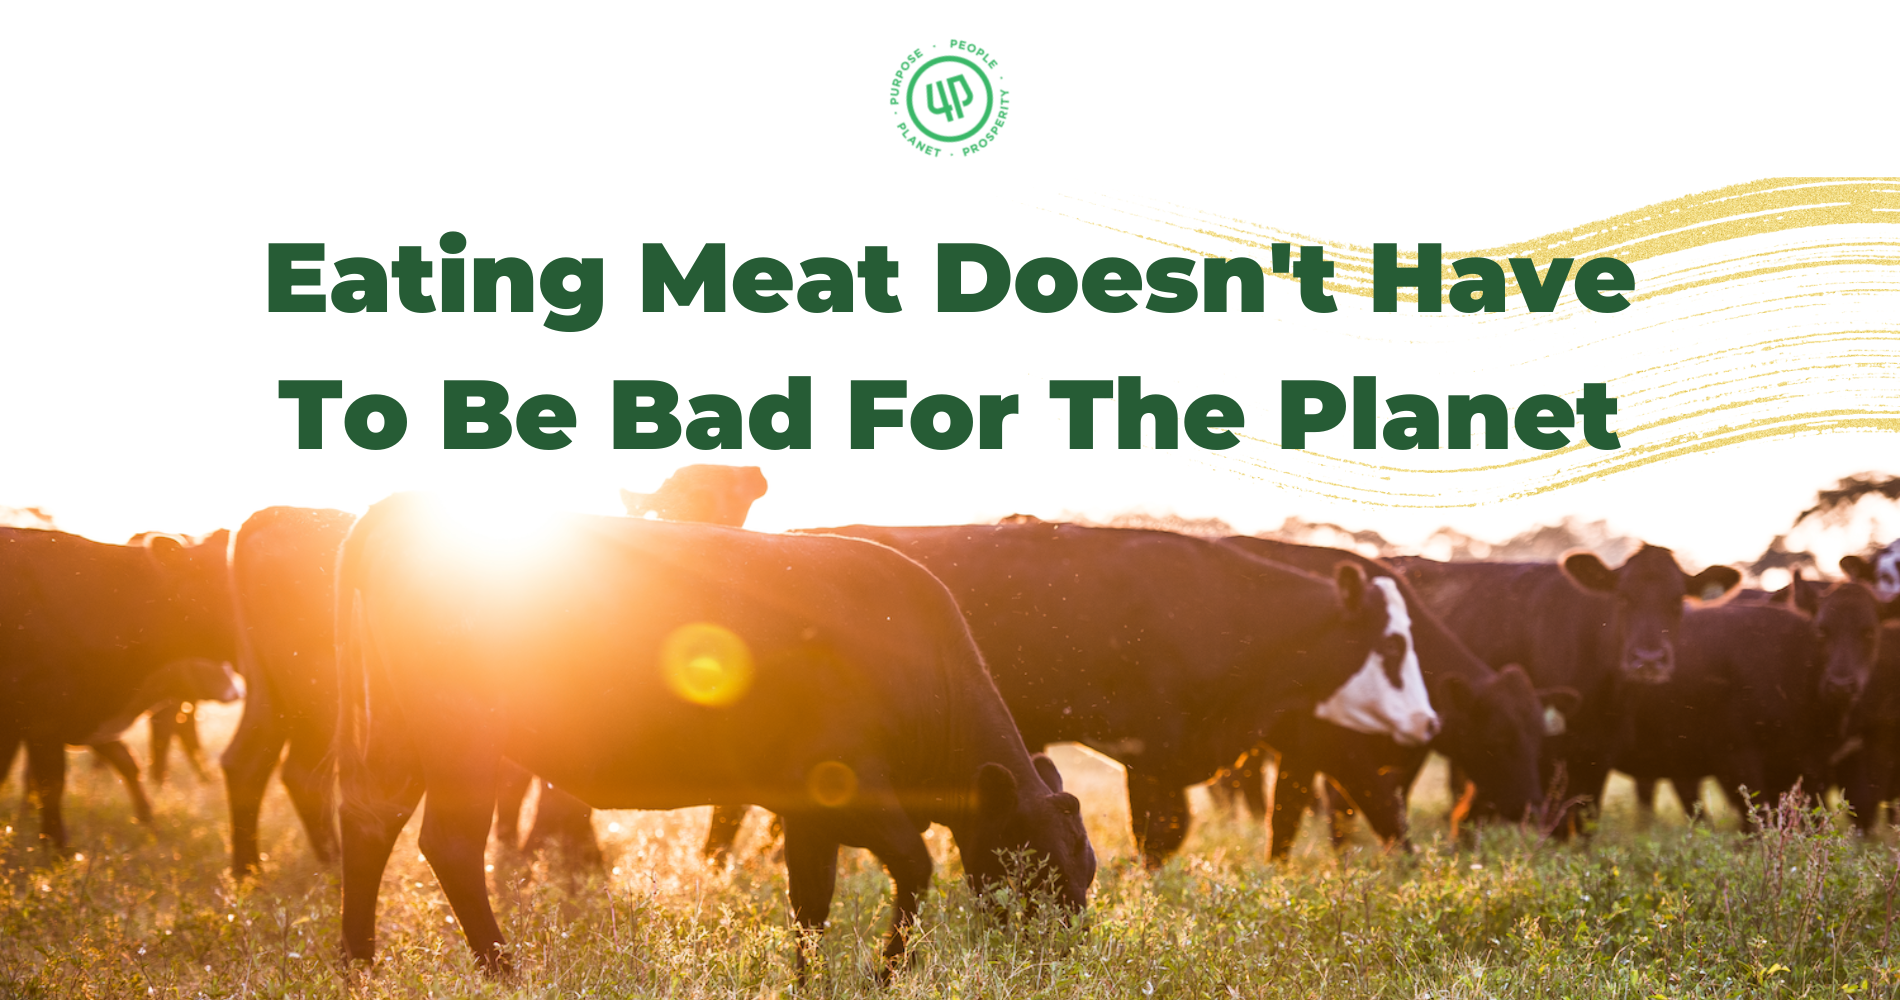 Eating Meat Doesn't Have To Be Bad For The Planet image